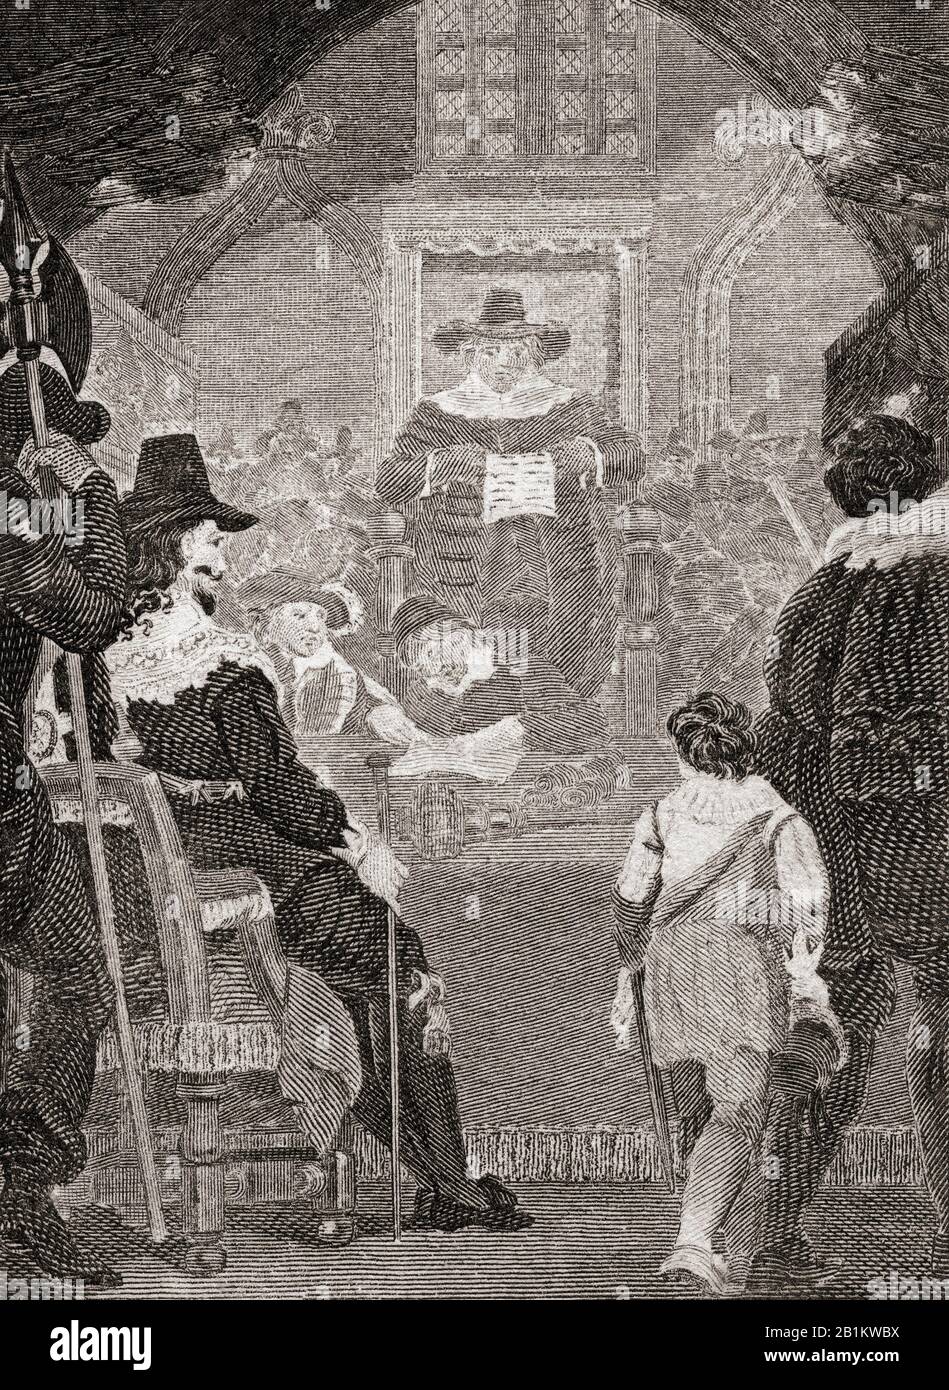 The trial of Charles I, 1649.  Charles I, 1600 – 1649.  King of England, King of Scotland, and King of Ireland, tried and executed for high treason.  From The History of England, from the earliest records to the year 1802, published 1812. Stock Photo